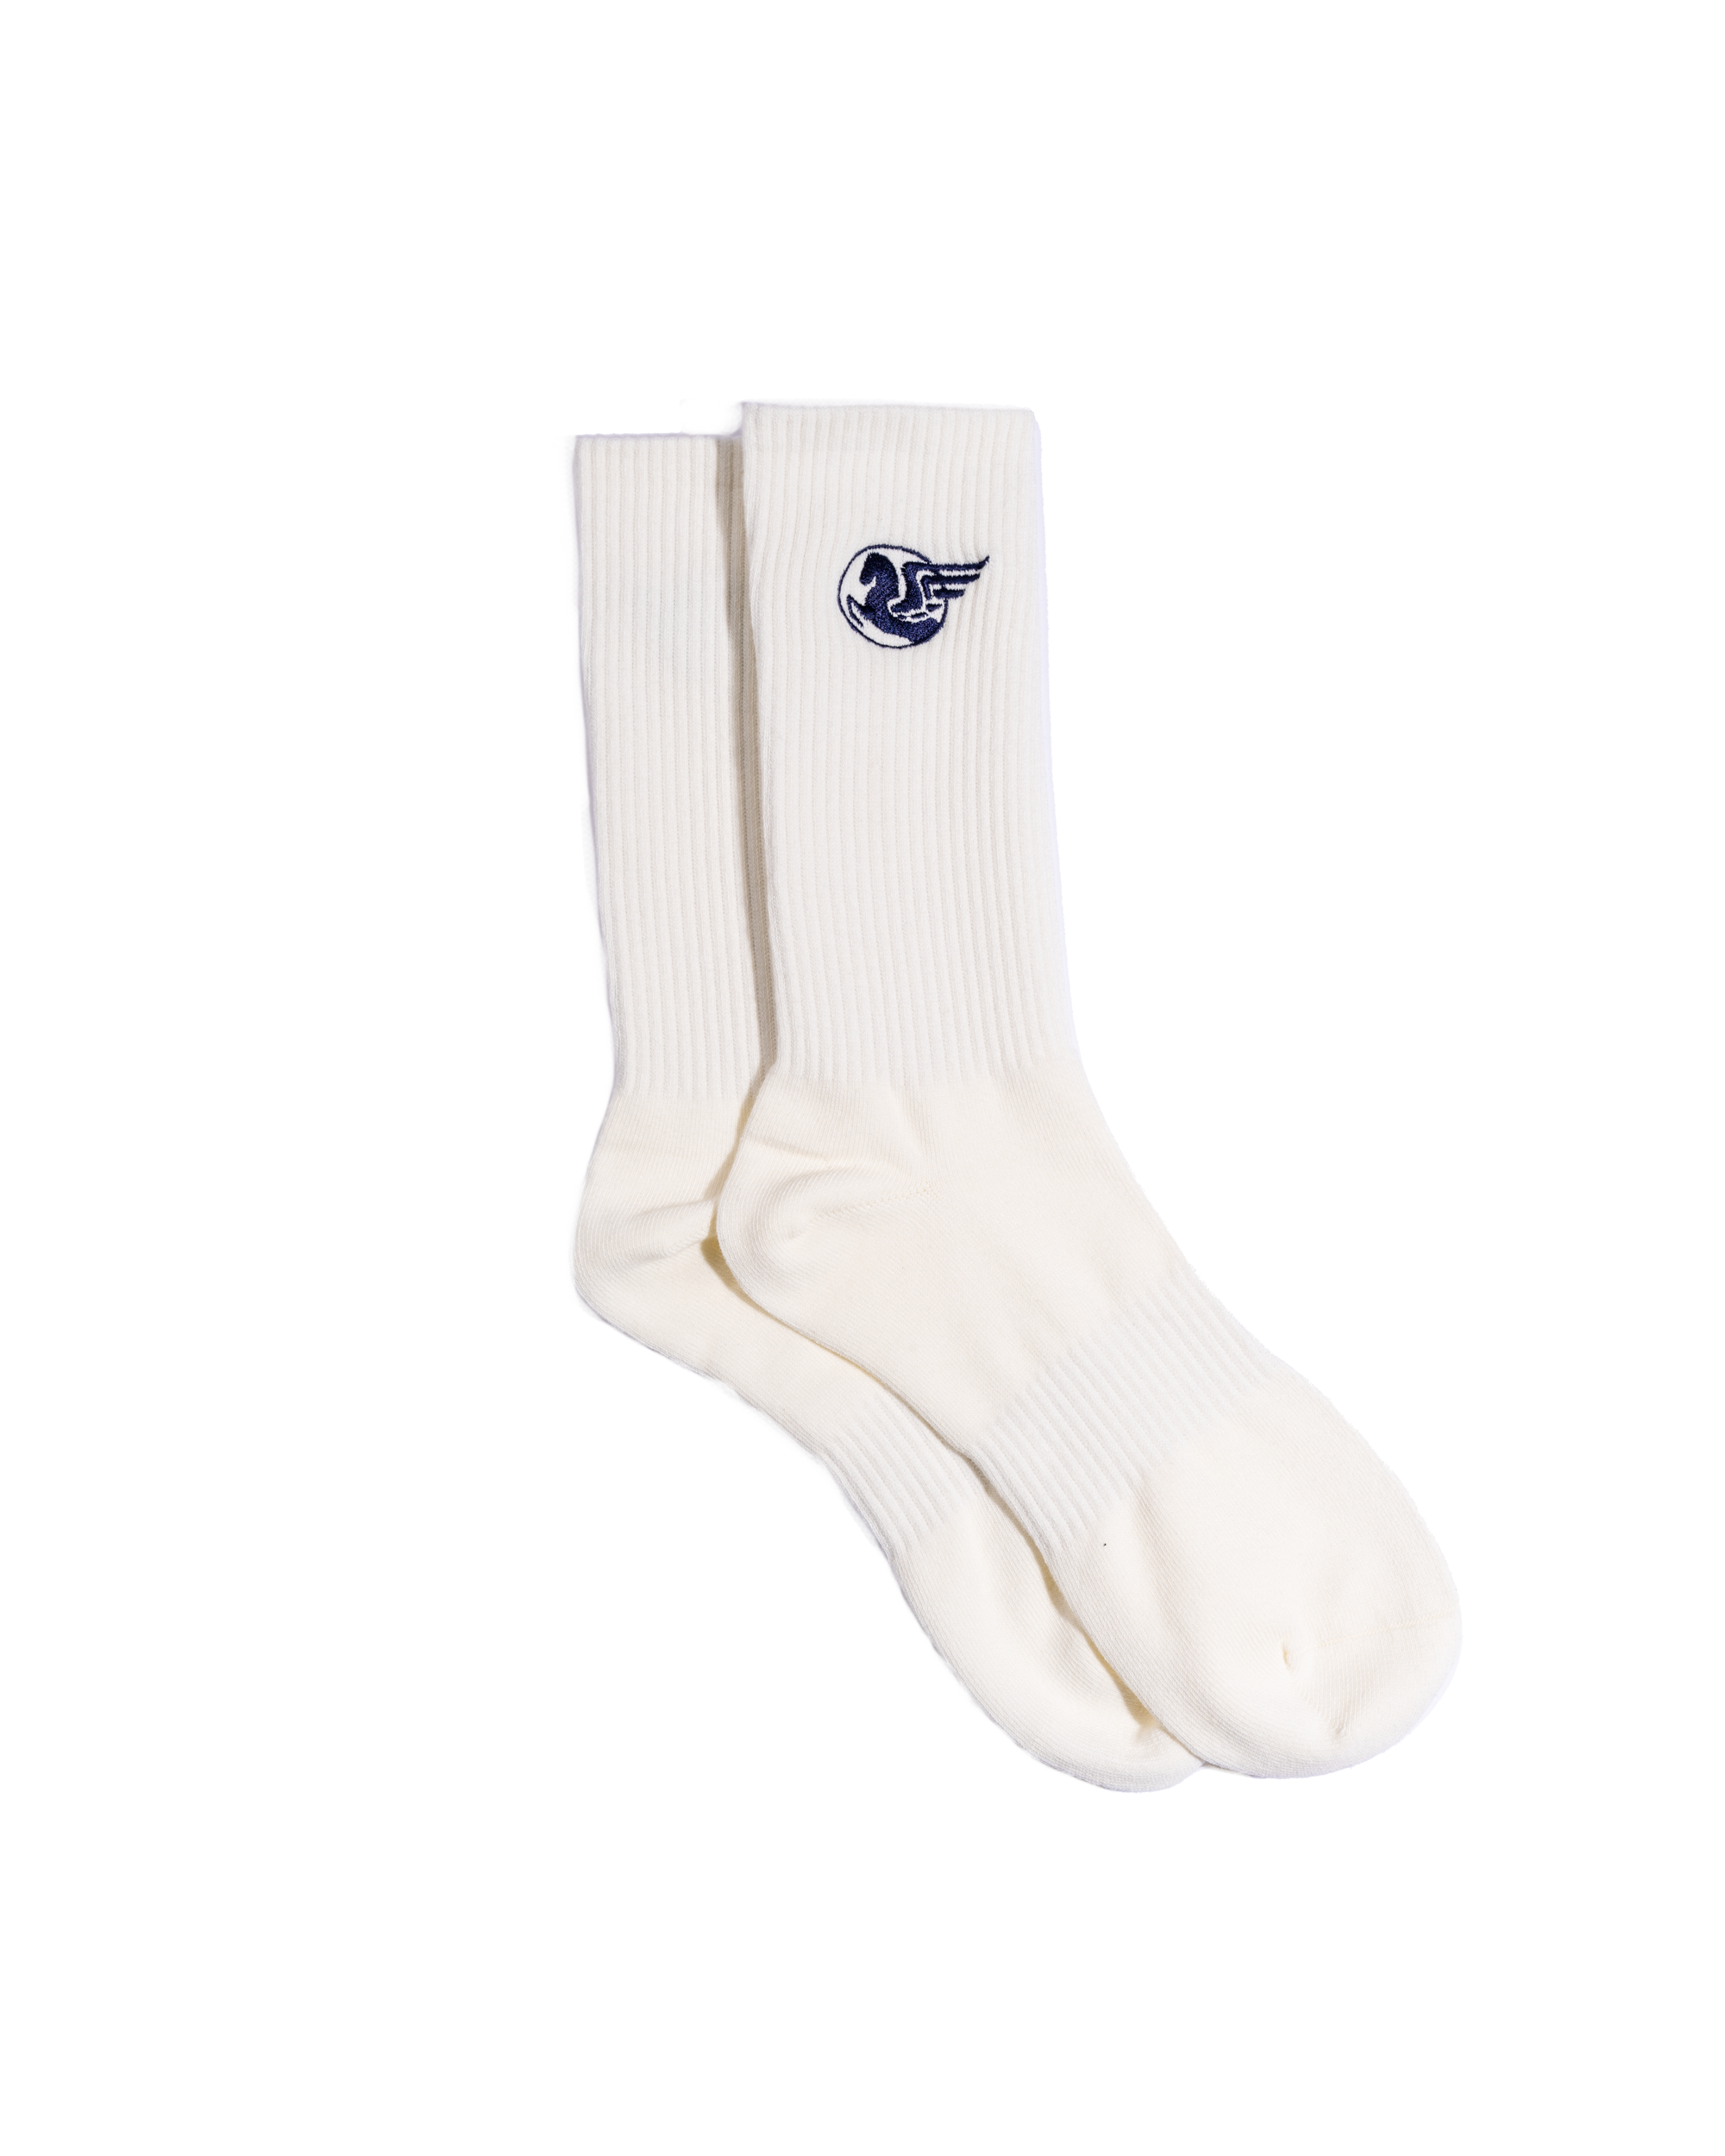 "Pégase" embroidered socks off white